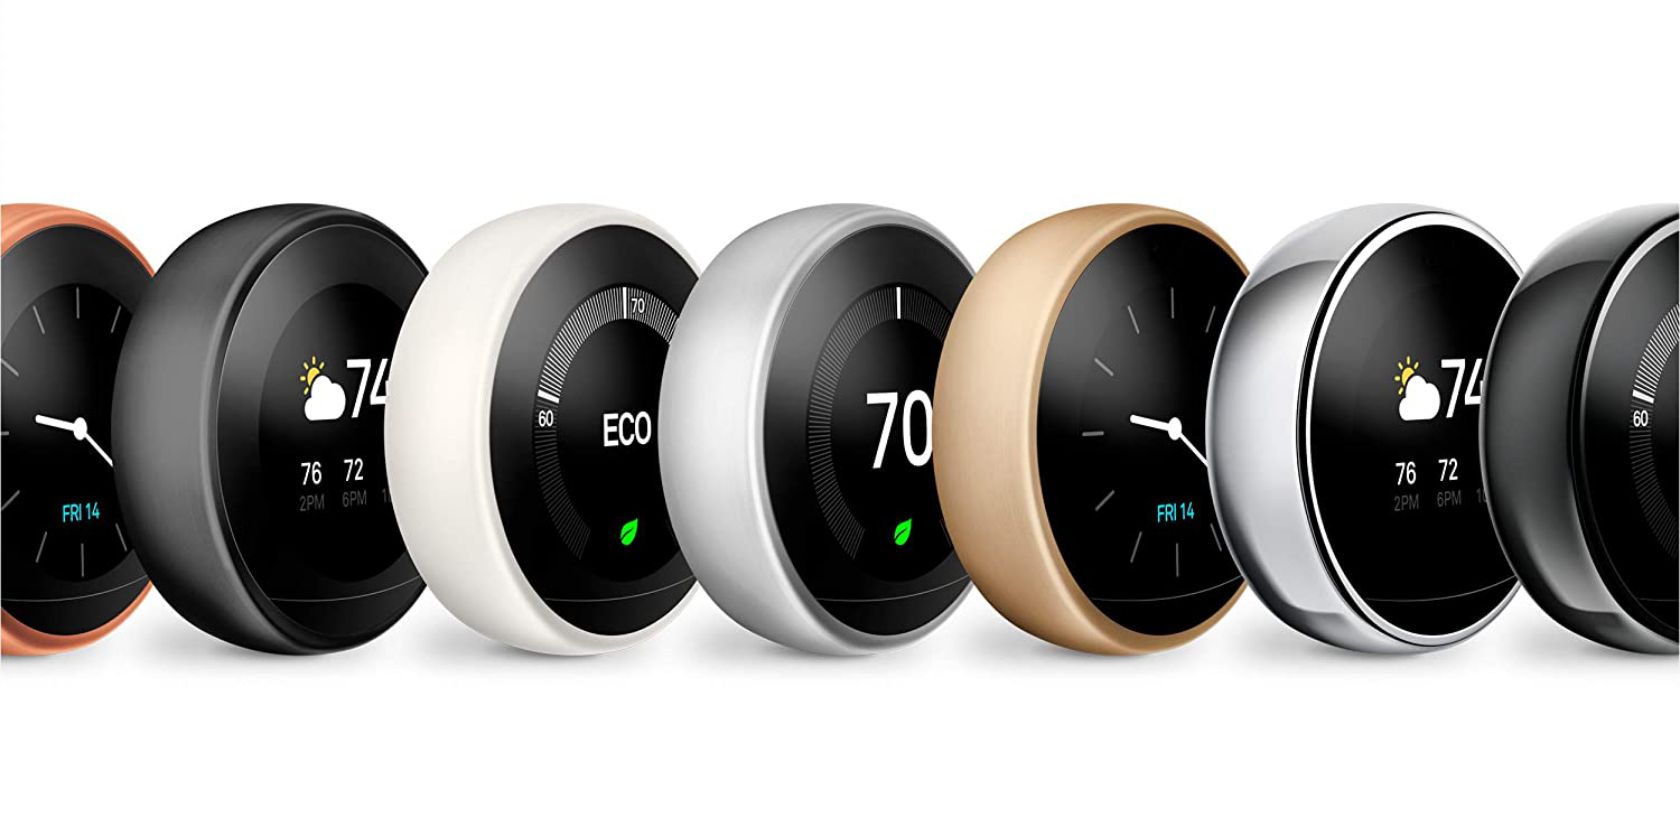 What is a Nest Thermostat and How Does It Work?